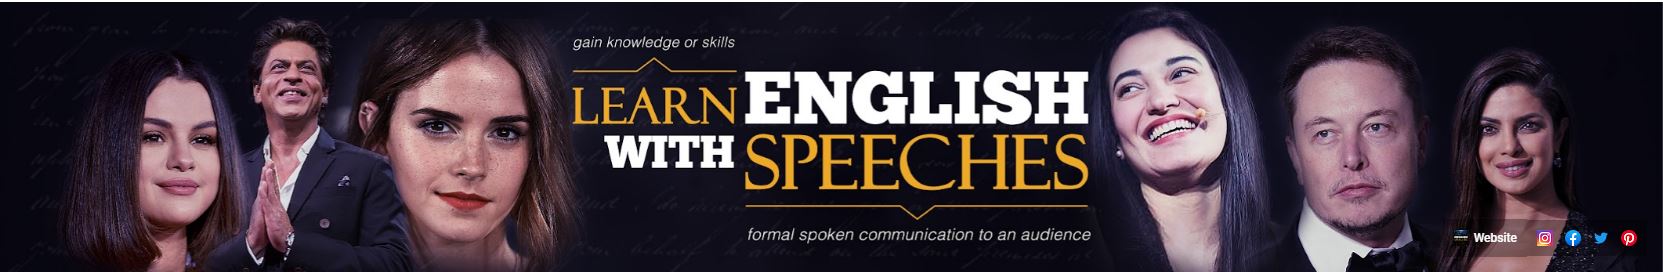 Learn English with Speeches YouTube Channel banner